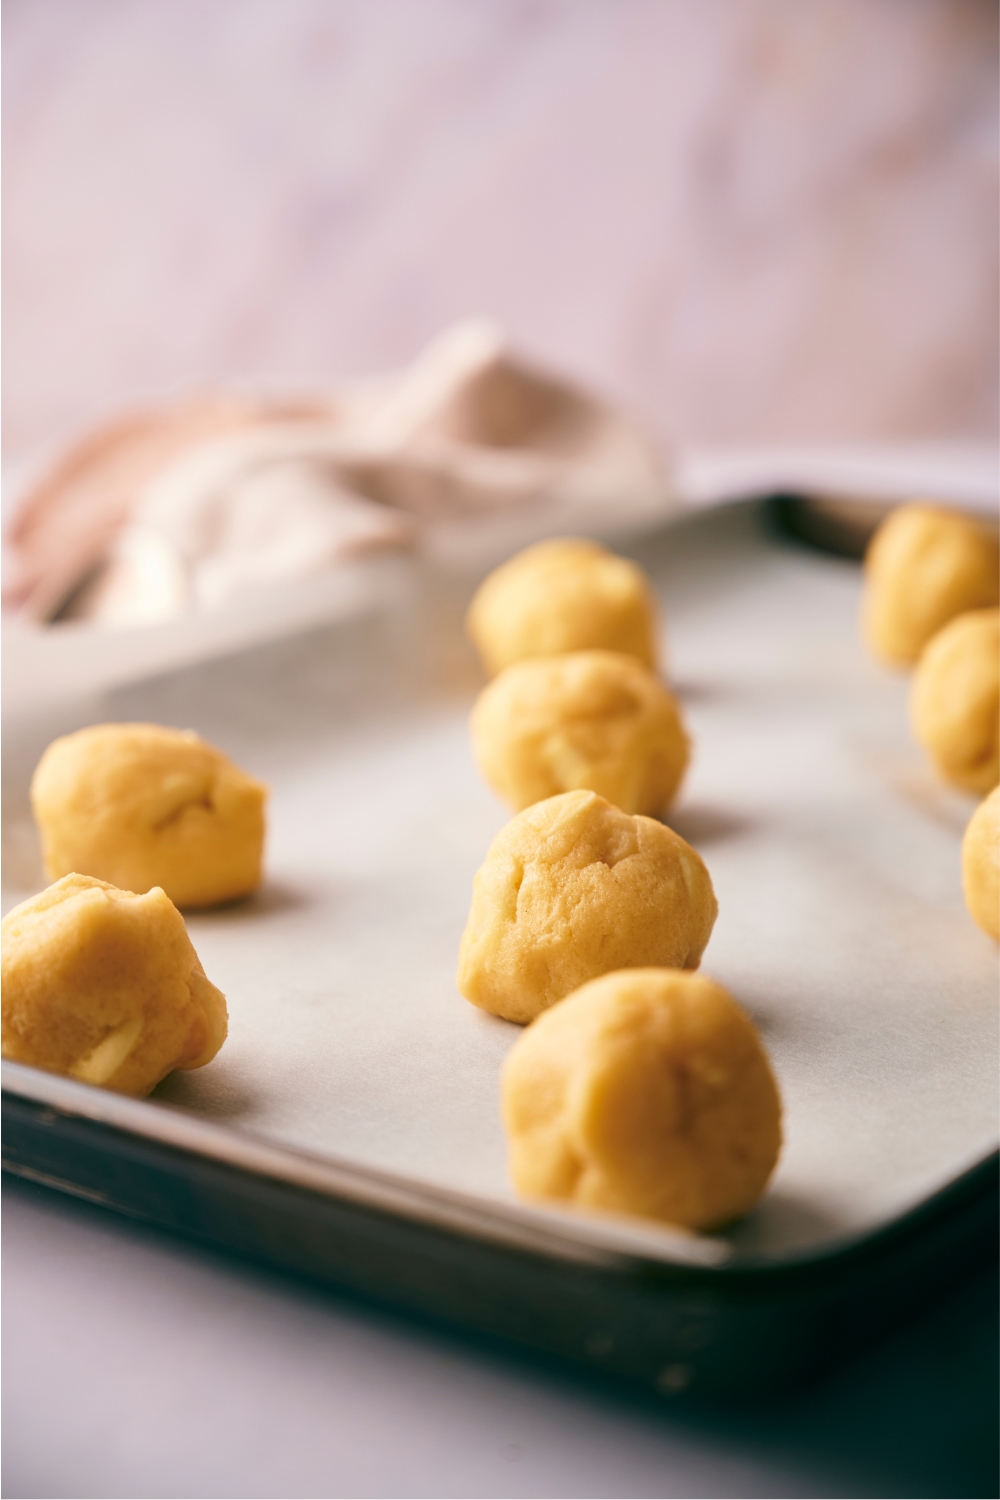 Baking sheet lined with parchment paper and cookie dough balls spread evenly on the baking sheet.